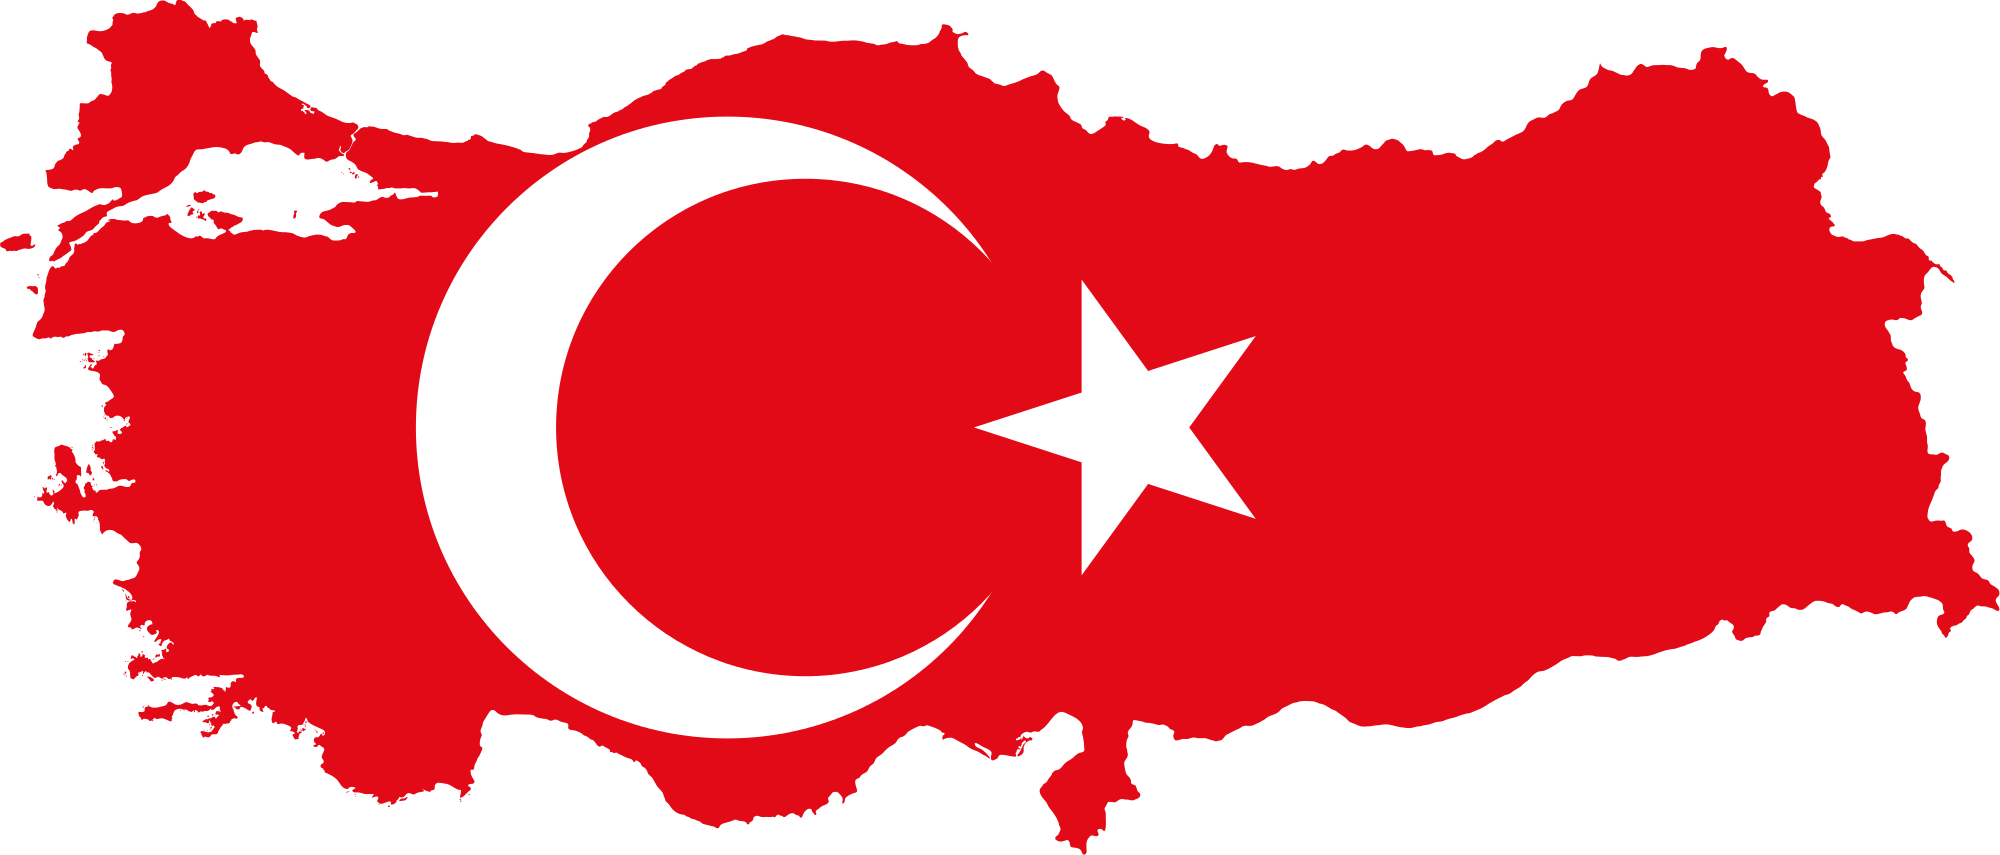 turkeys clipart country